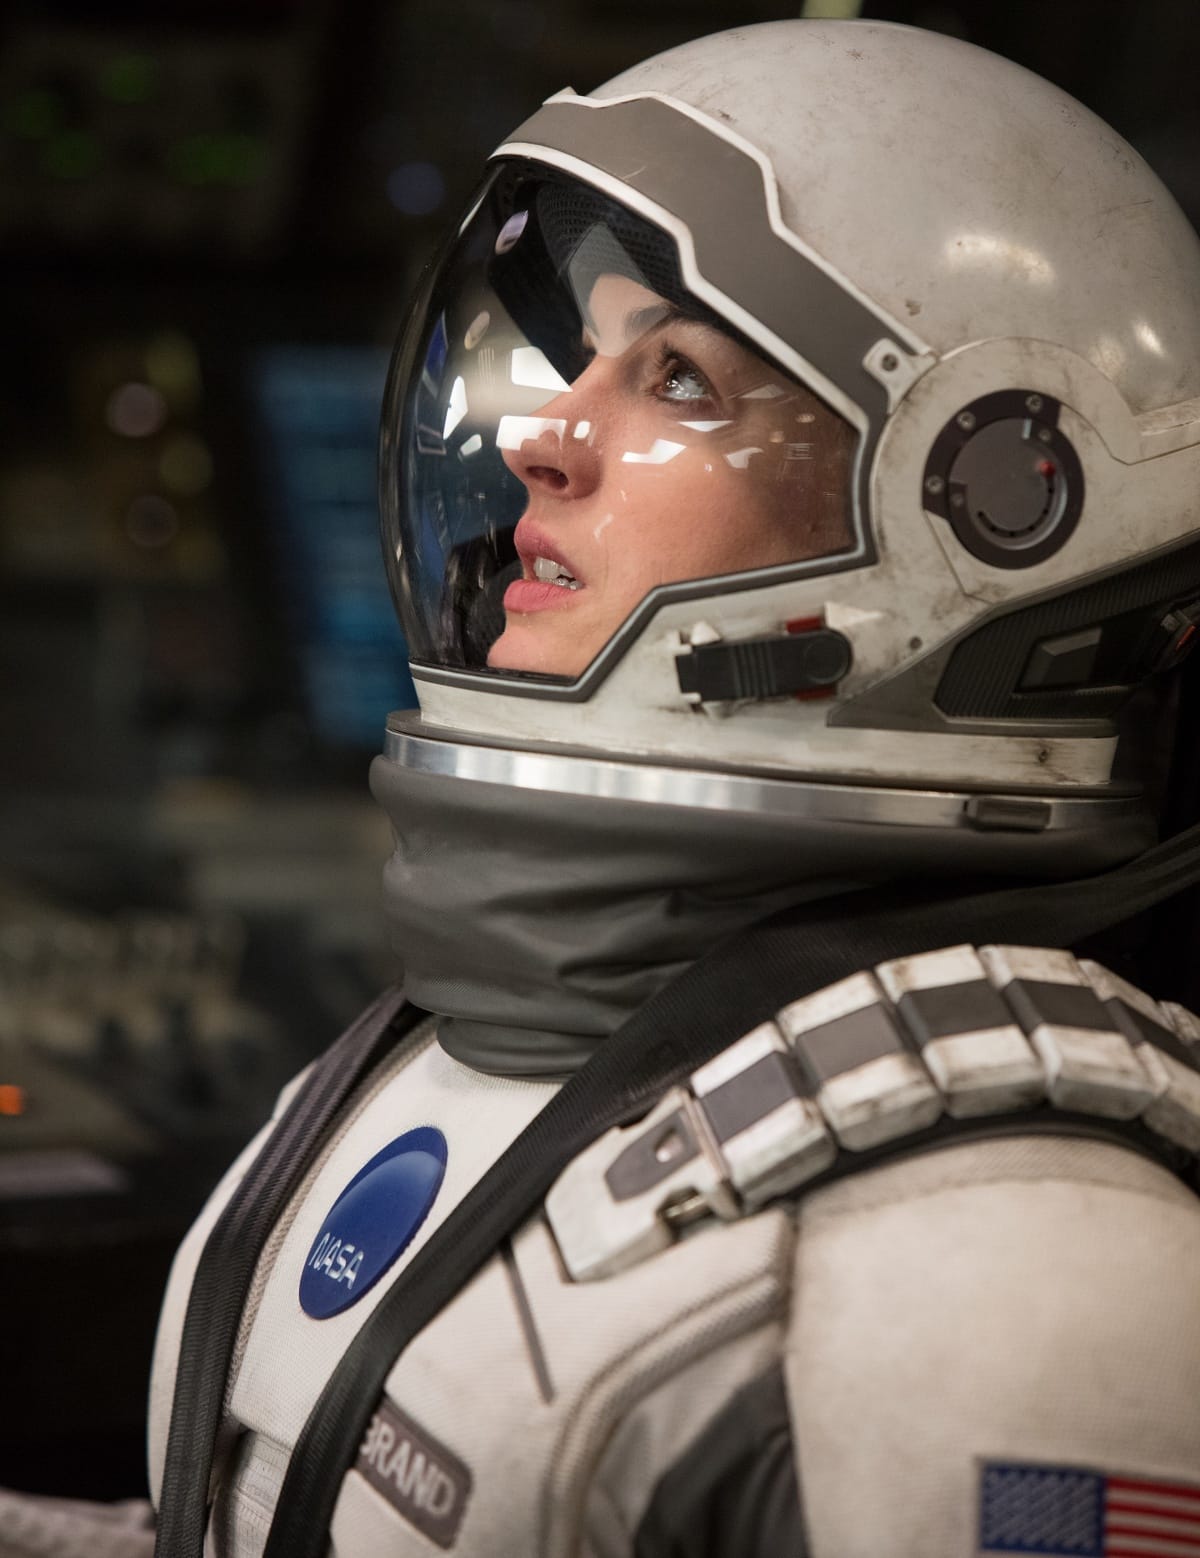 Anne Hathaway as Dr. Amelia Brand in the 2014 epic science fiction film Interstellar